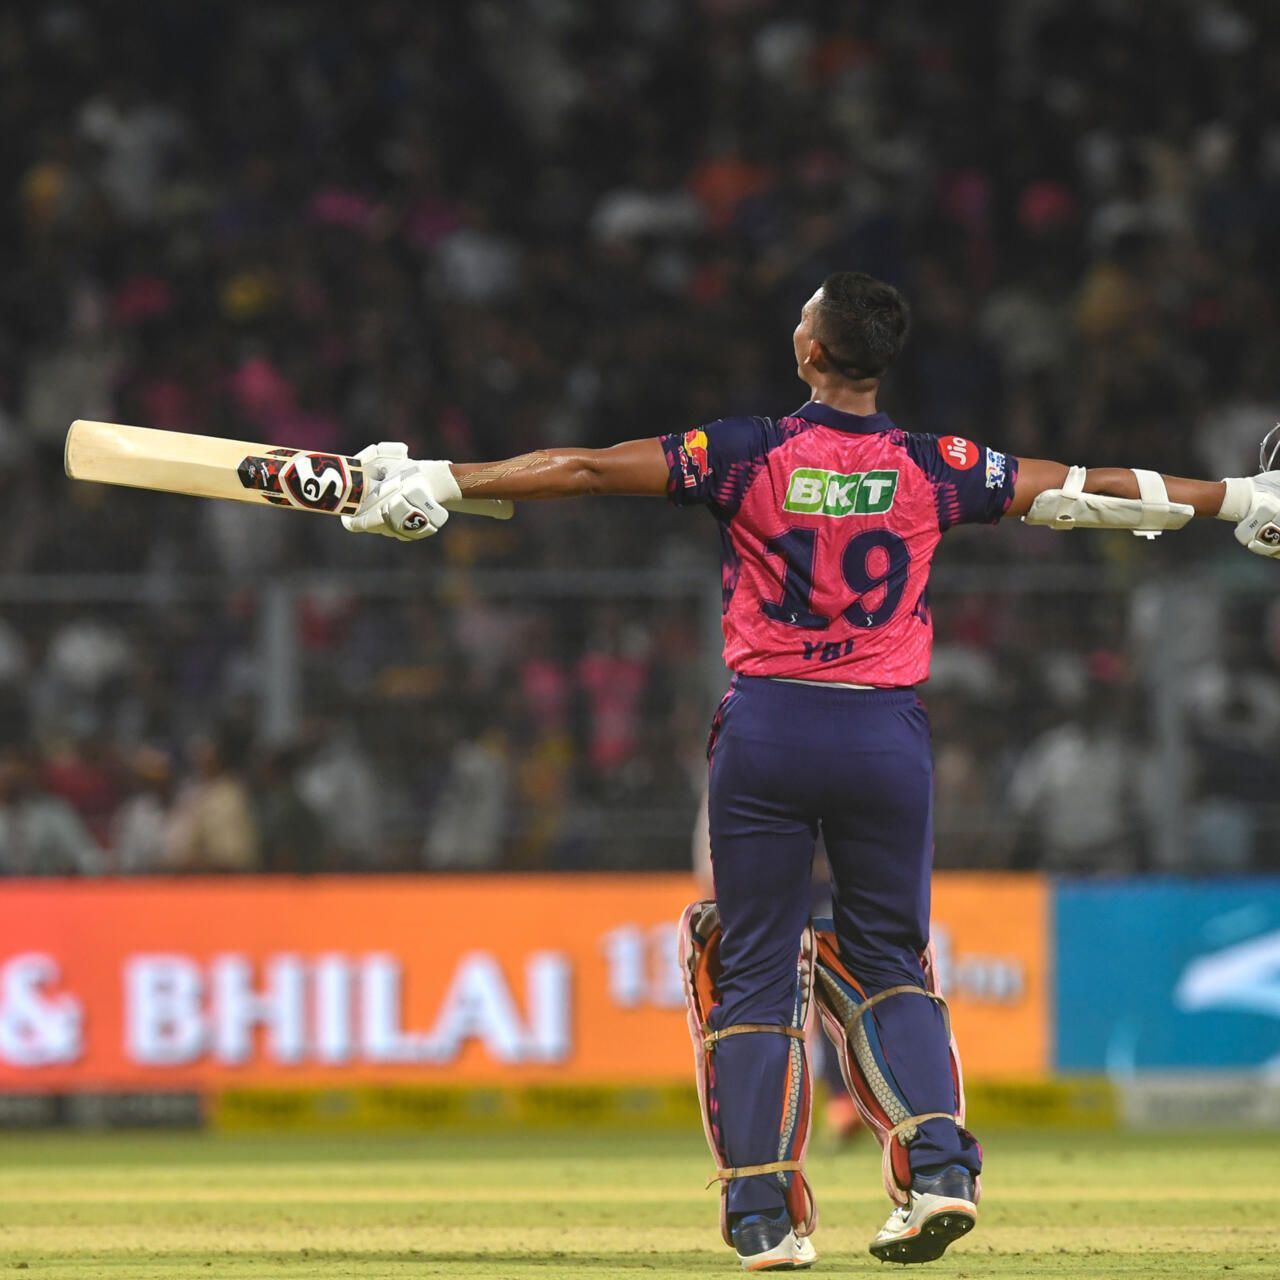 Yashasvi Jaiswal now holds the record for the fastest half-century in the history of the IPL.